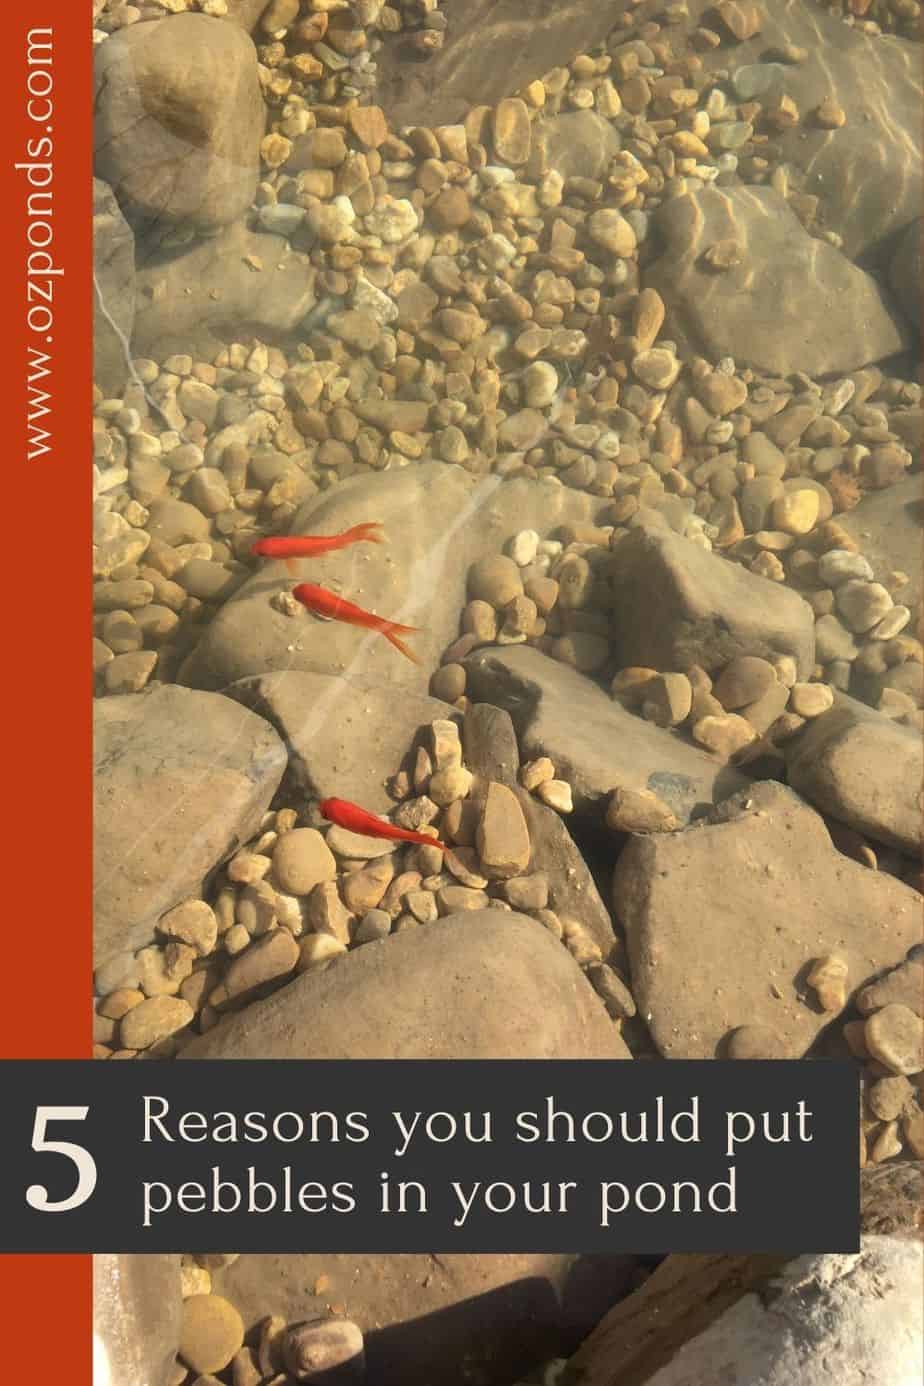 5 reasons you should add rocks and pebbles to your pond